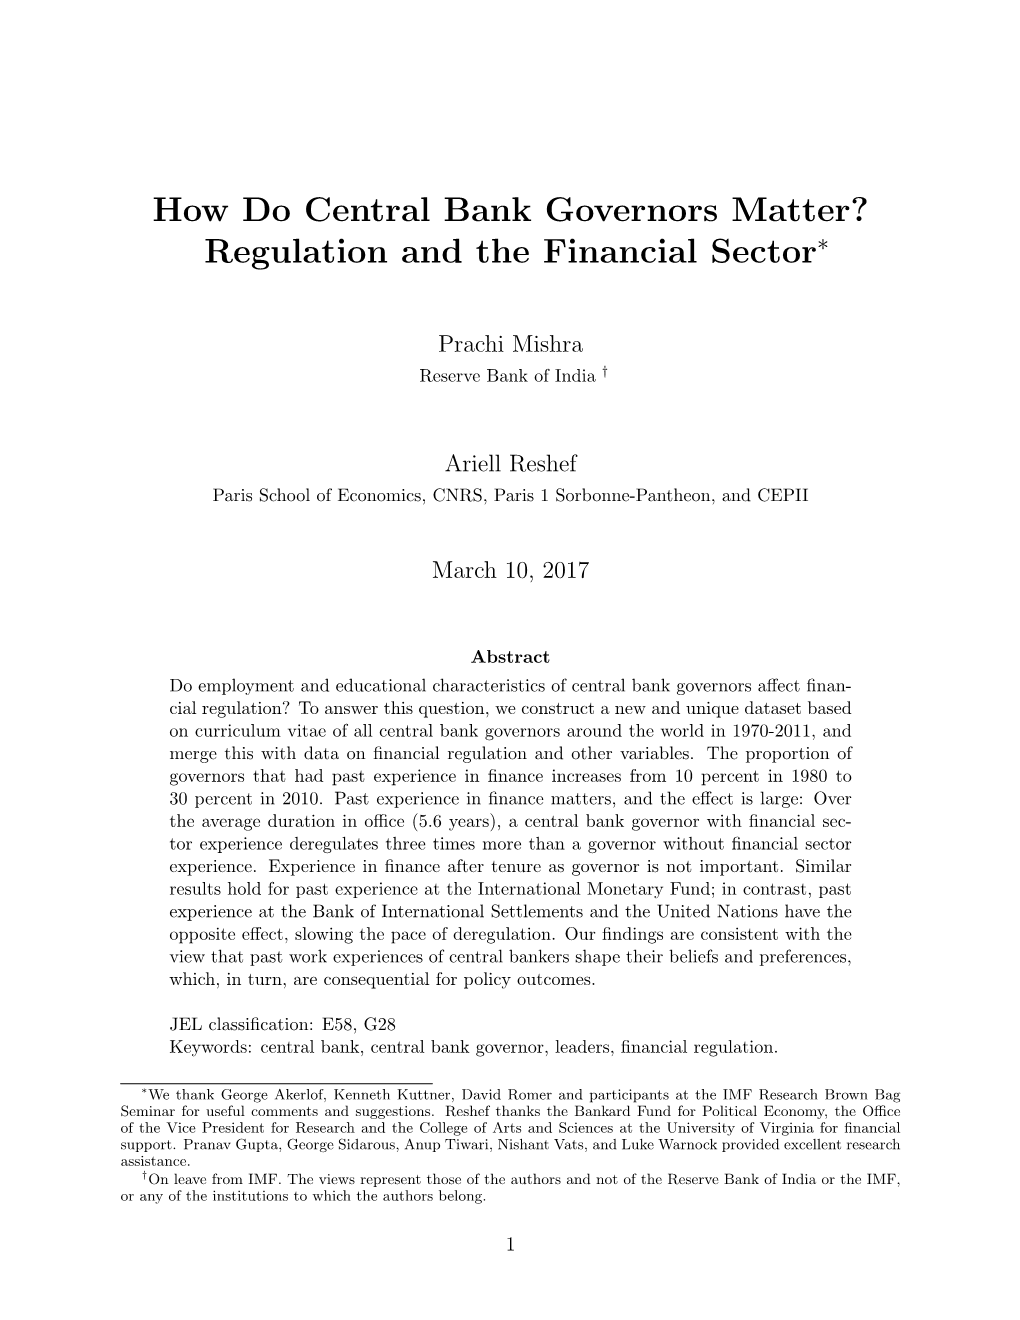 How Do Central Bank Governors Matter? Regulation and the Financial Sector∗